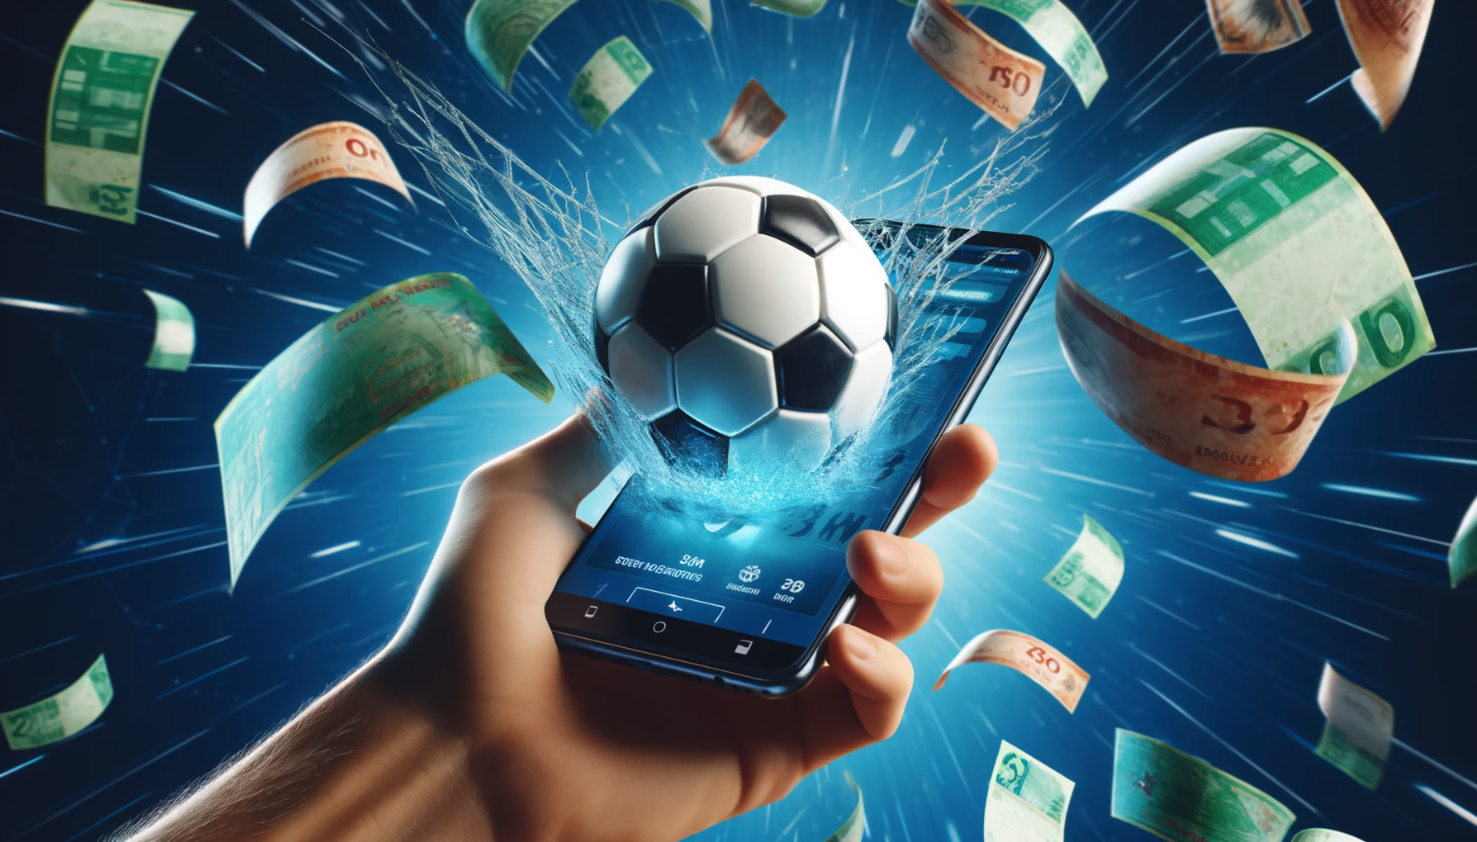 payments pix betting sports